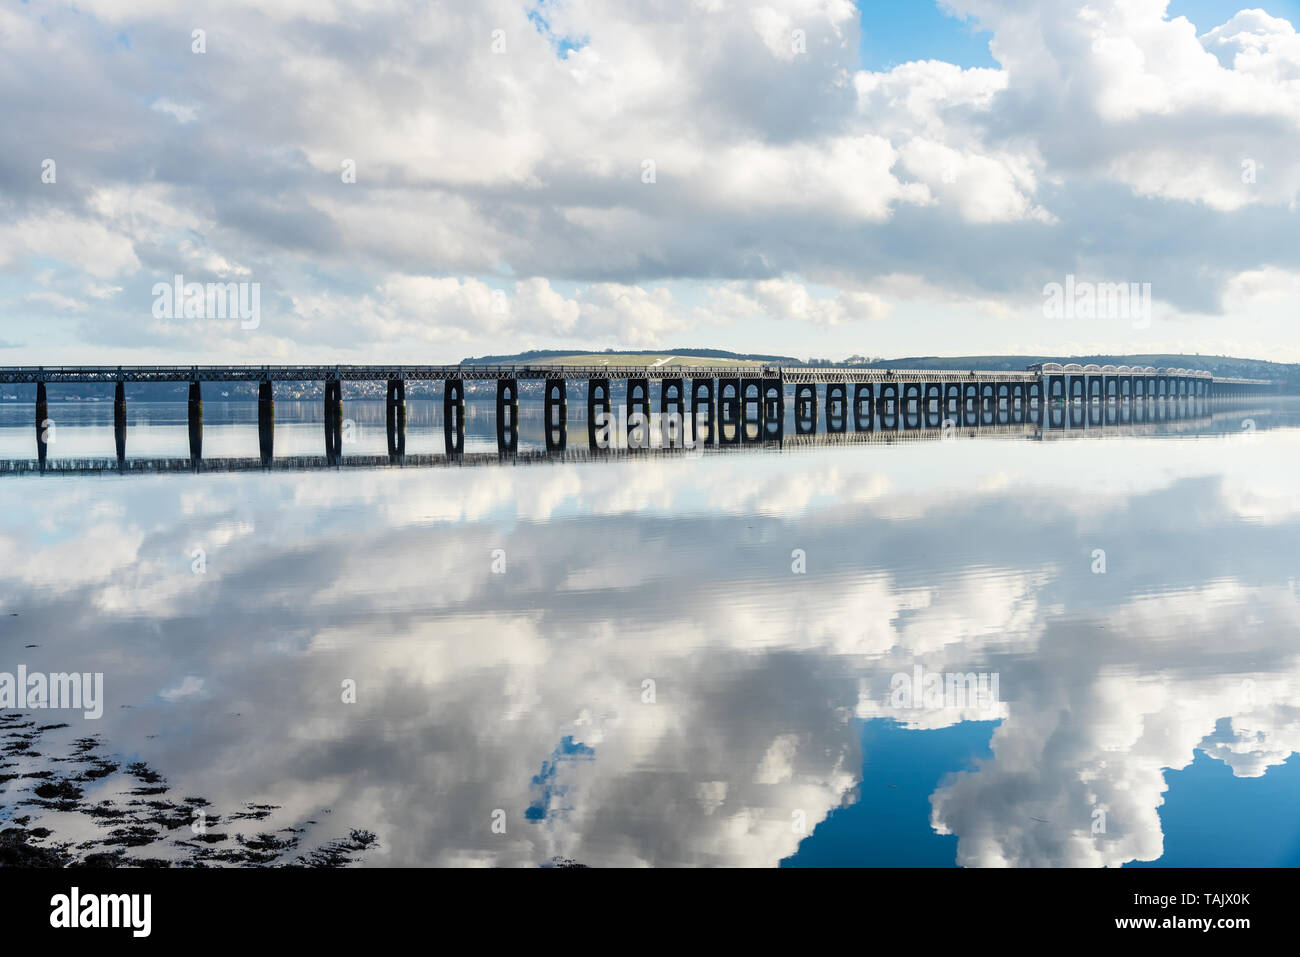 View of an empty railway bridge spannig a river on a partly cloudy winter morning. Reflection in water. Stock Photo